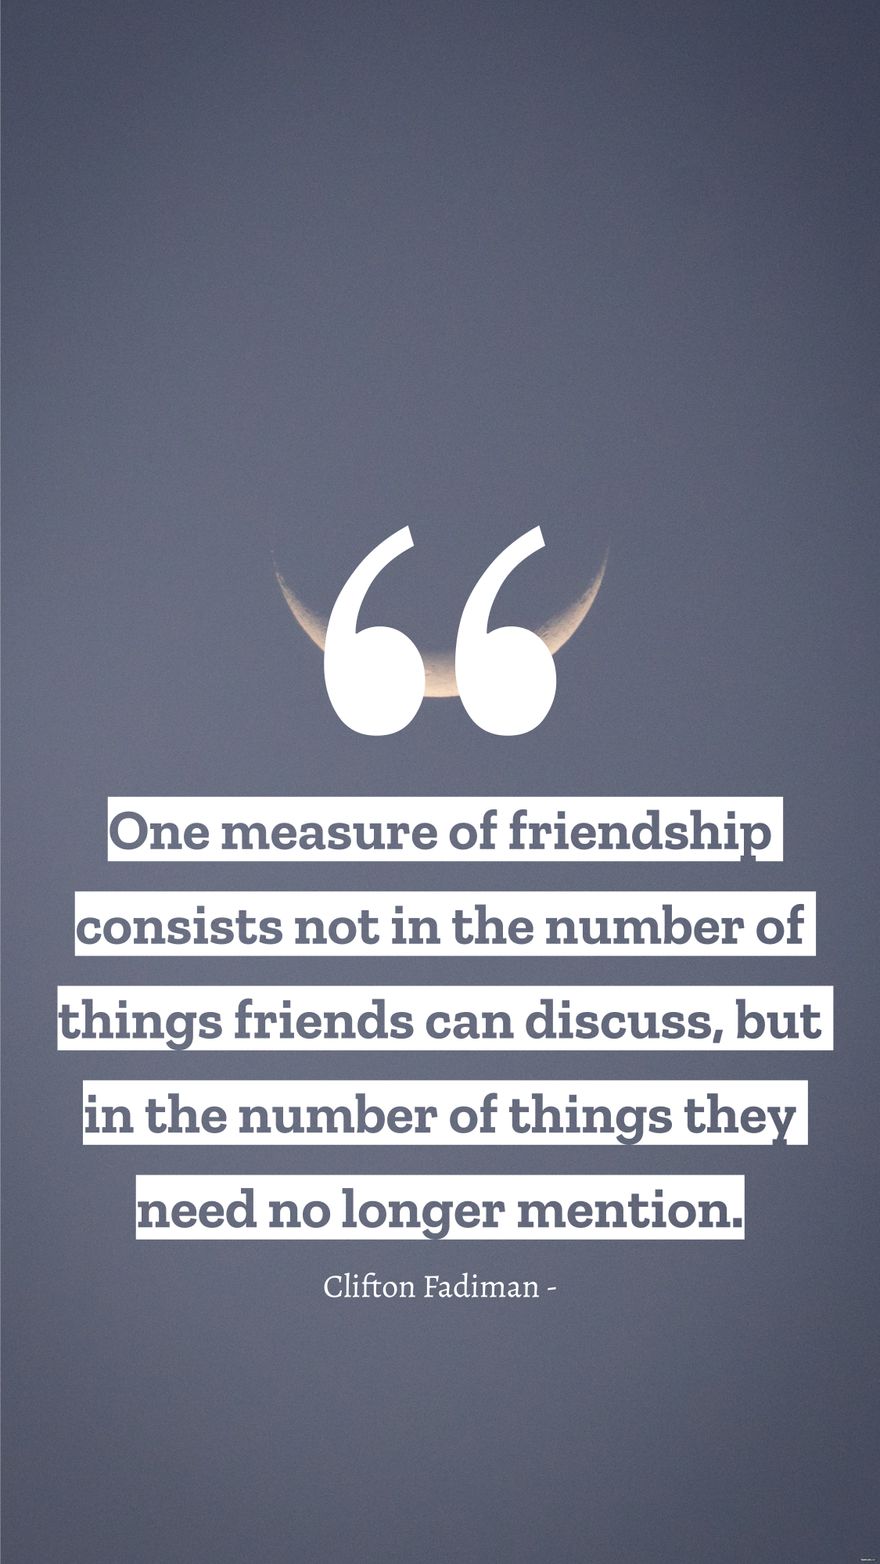 Clifton Fadiman - One measure of friendship consists not in the number of things friends can discuss, but in the number of things they need no longer mention.